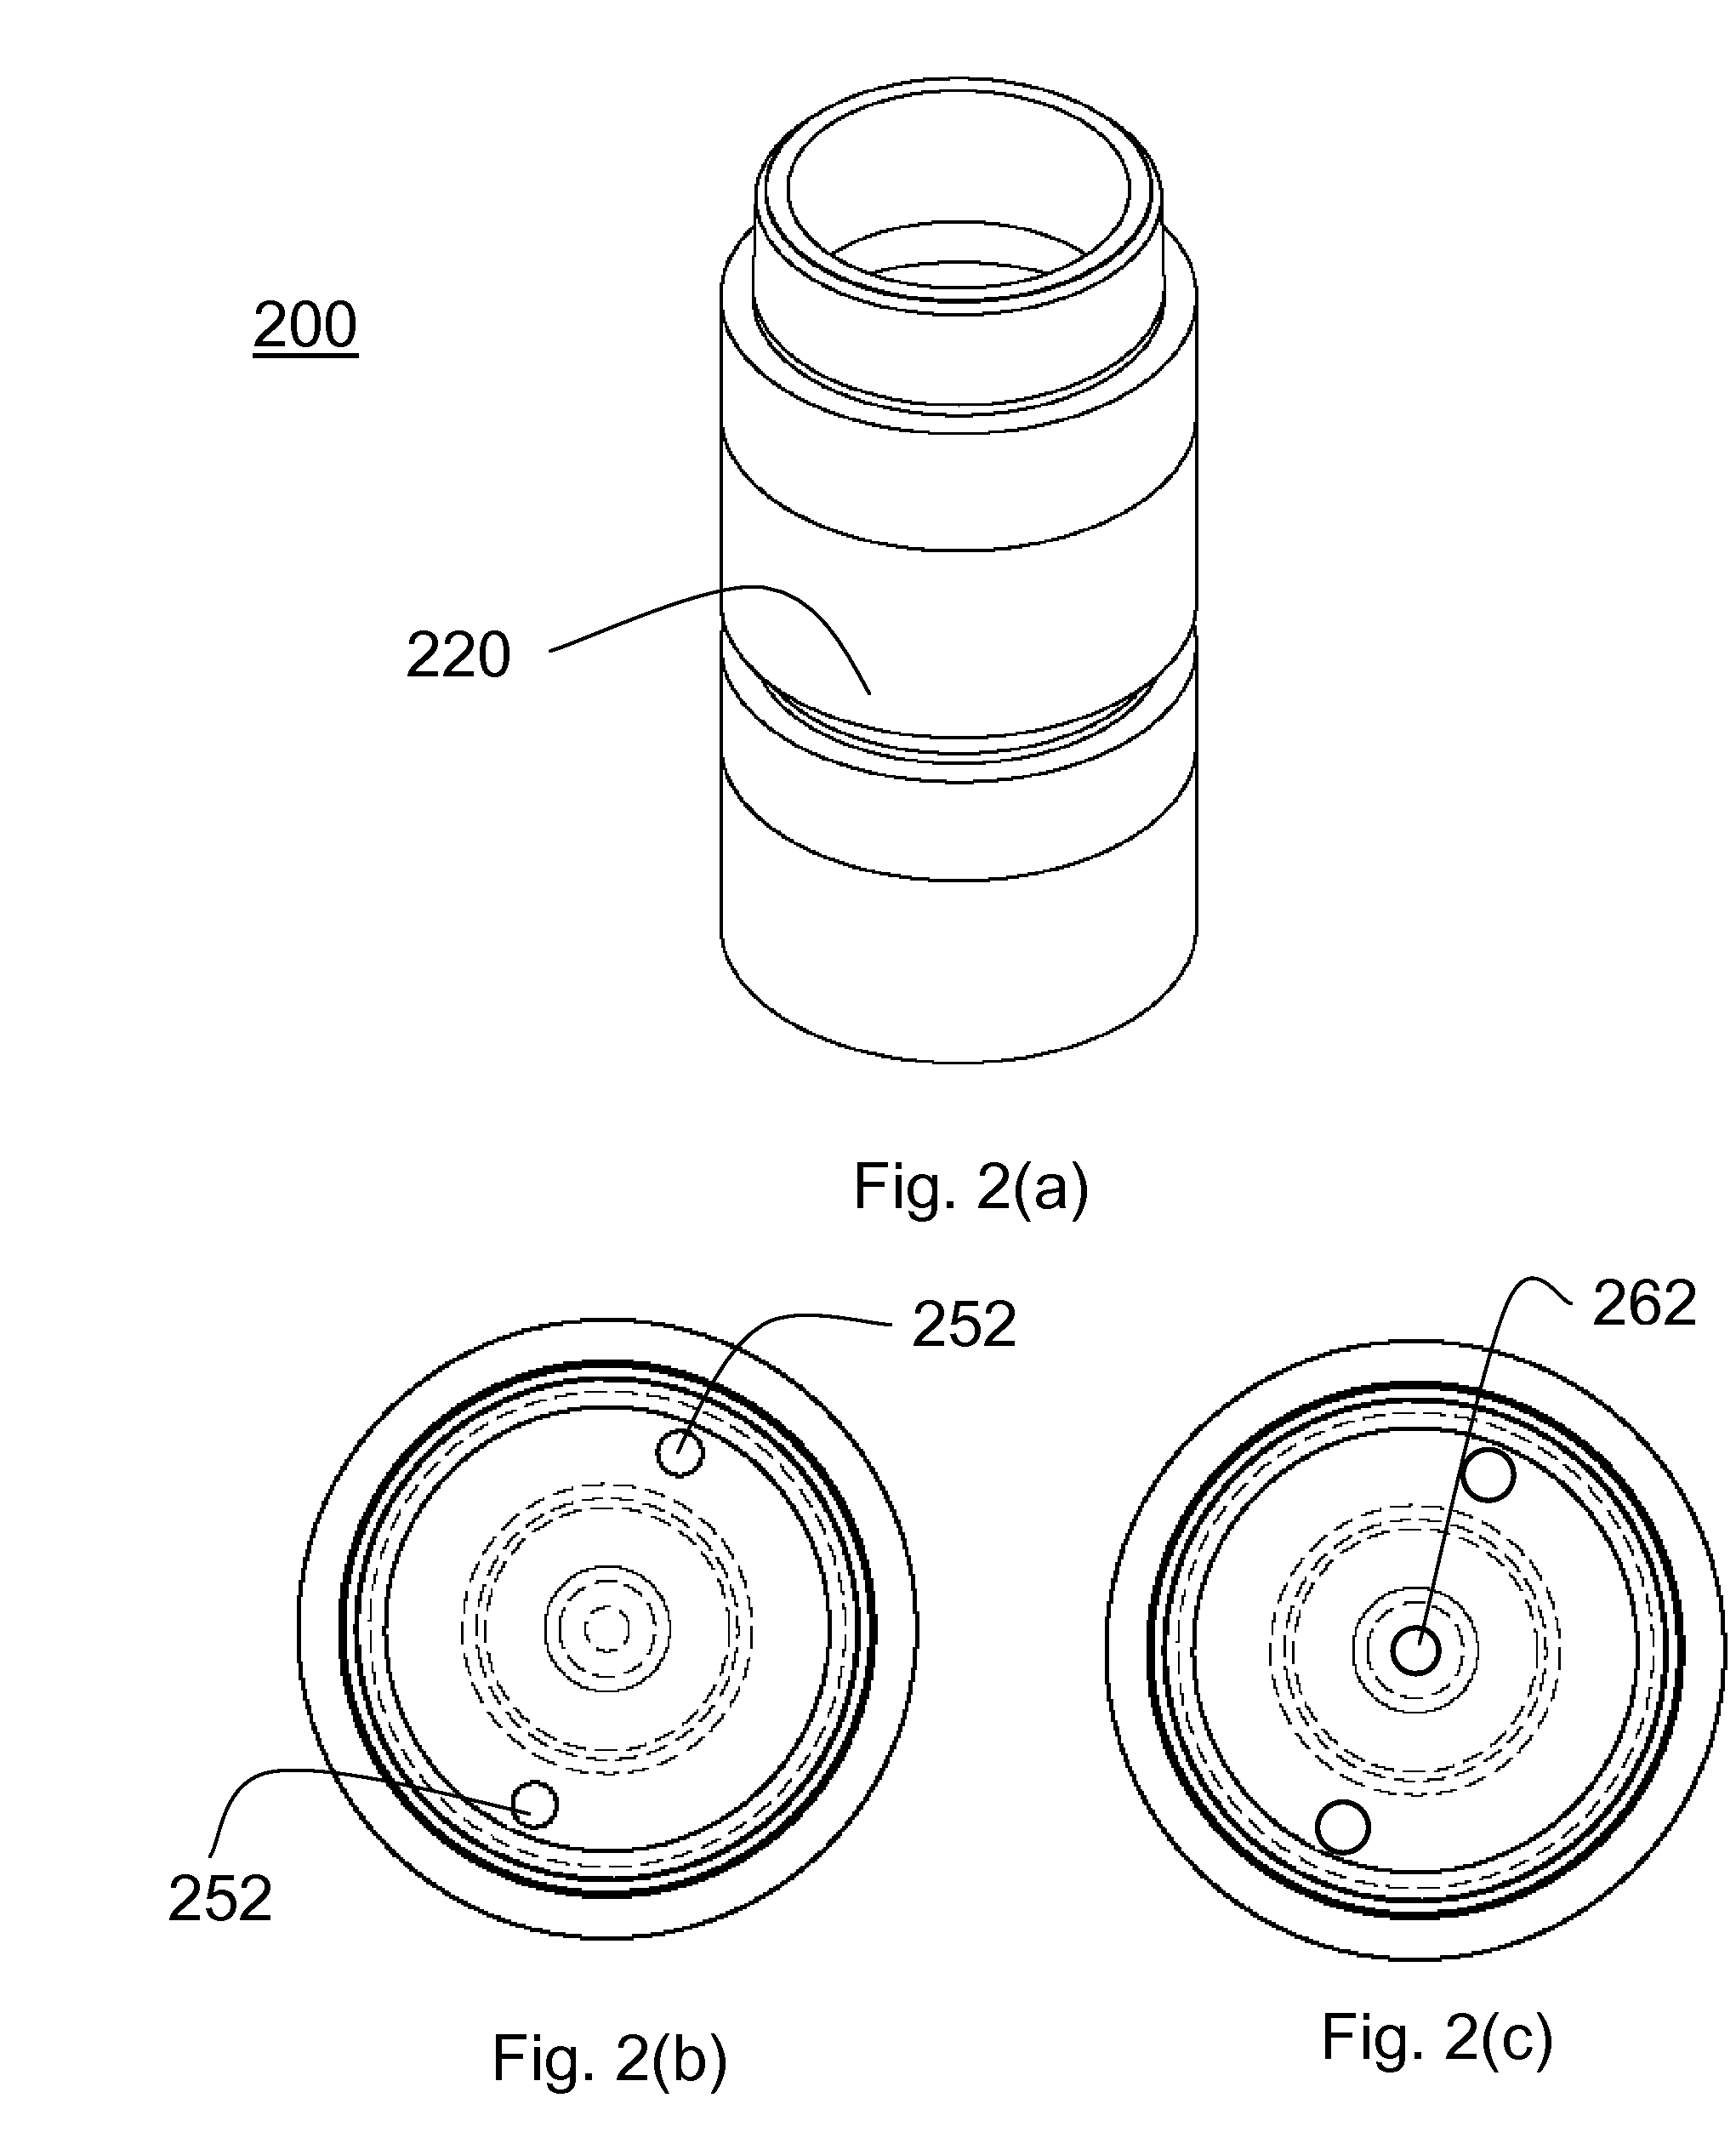 System and Method for Demonstrating Water Filtration and Purification Techniques